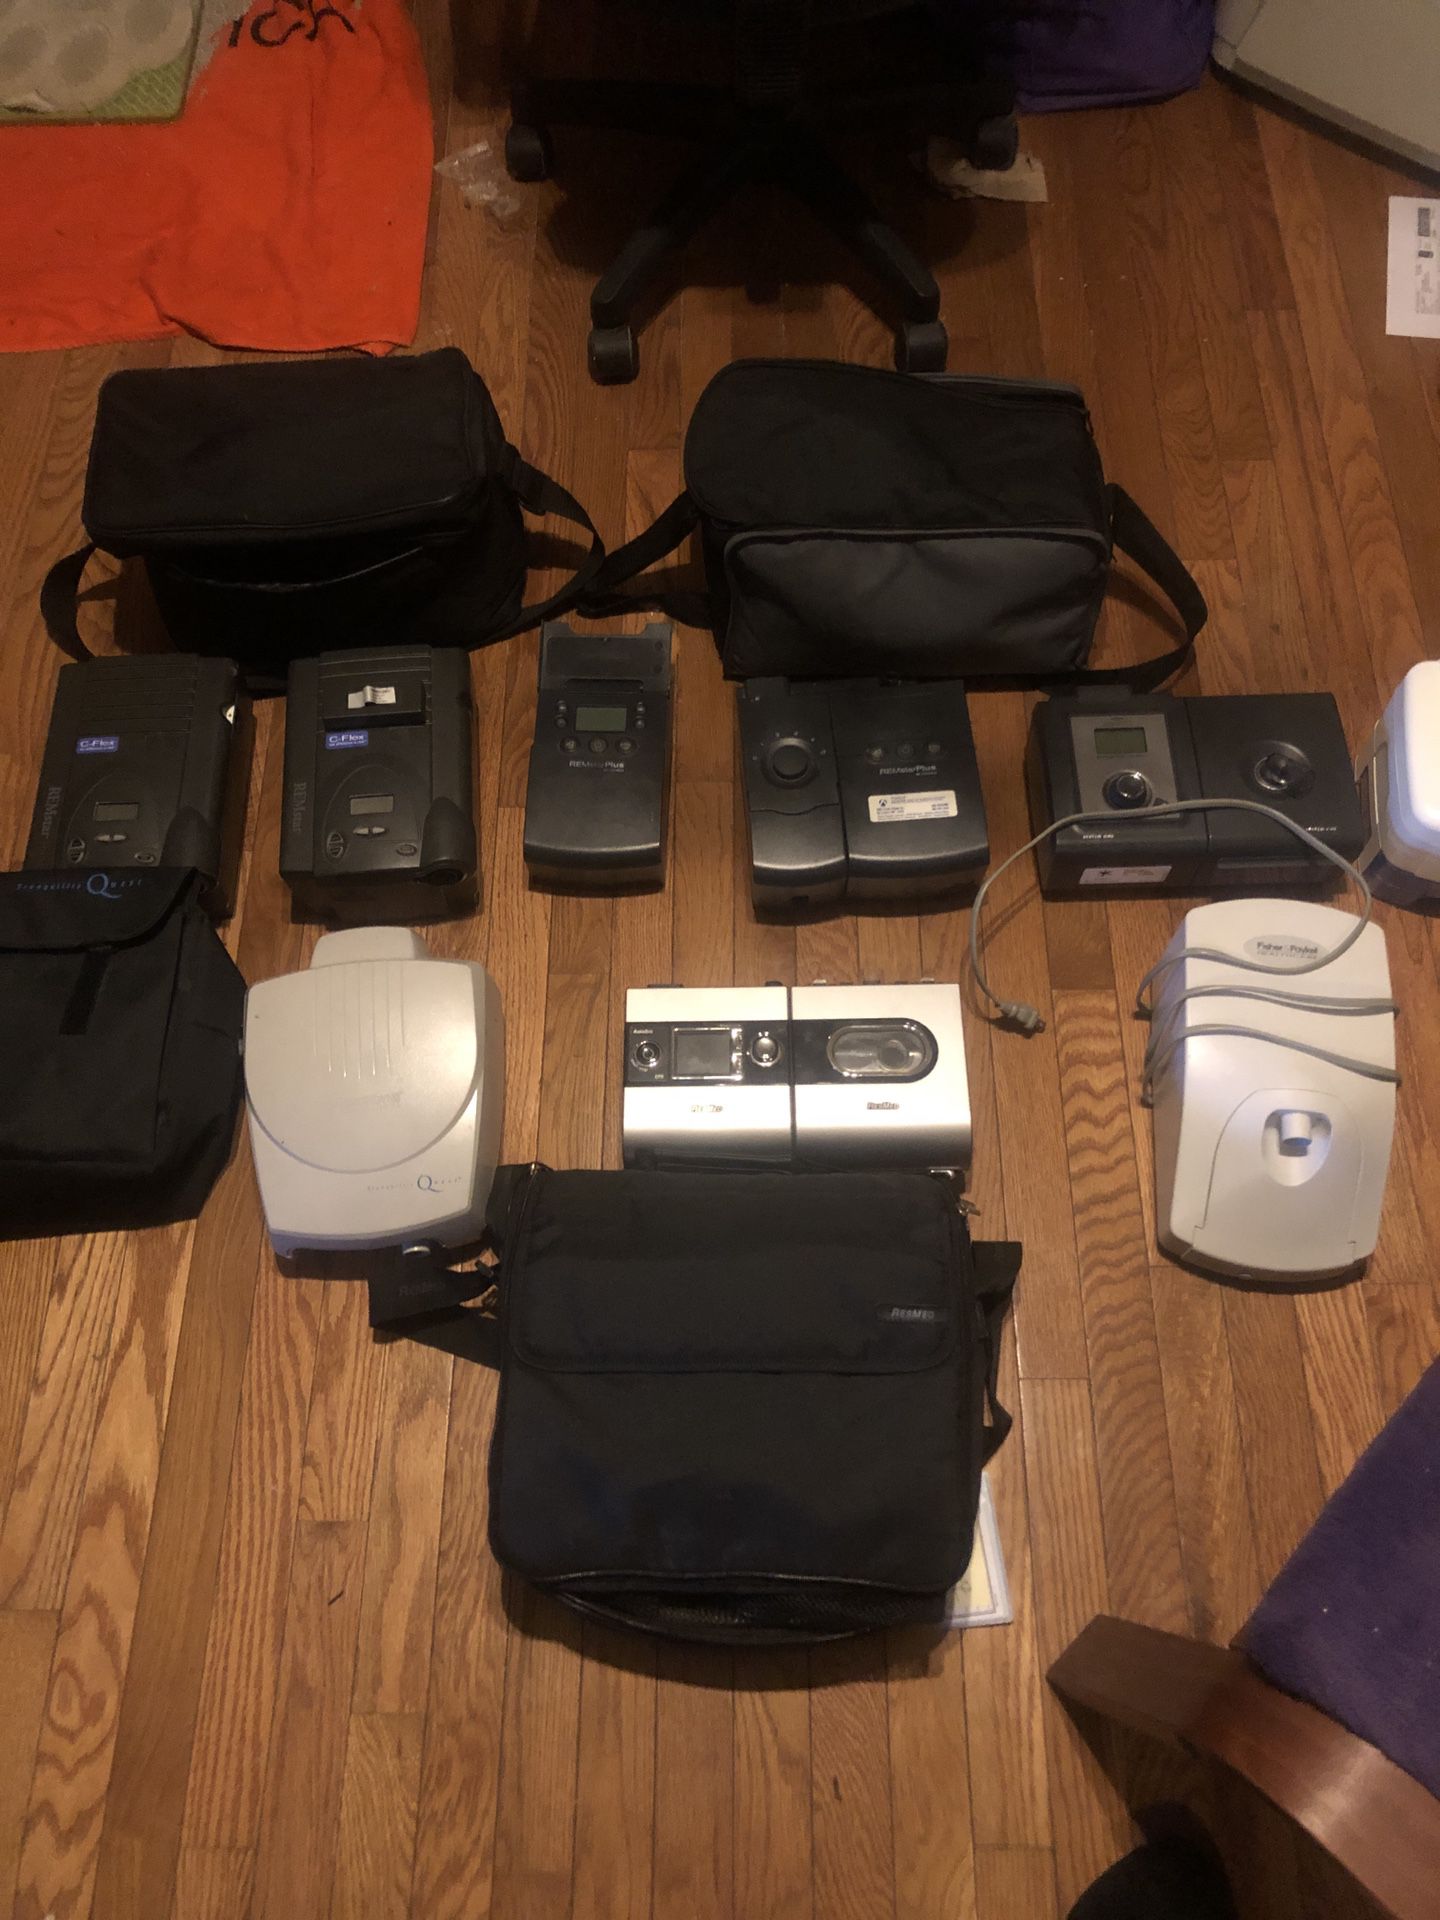 CPAP and BiPAP machines $185-$400